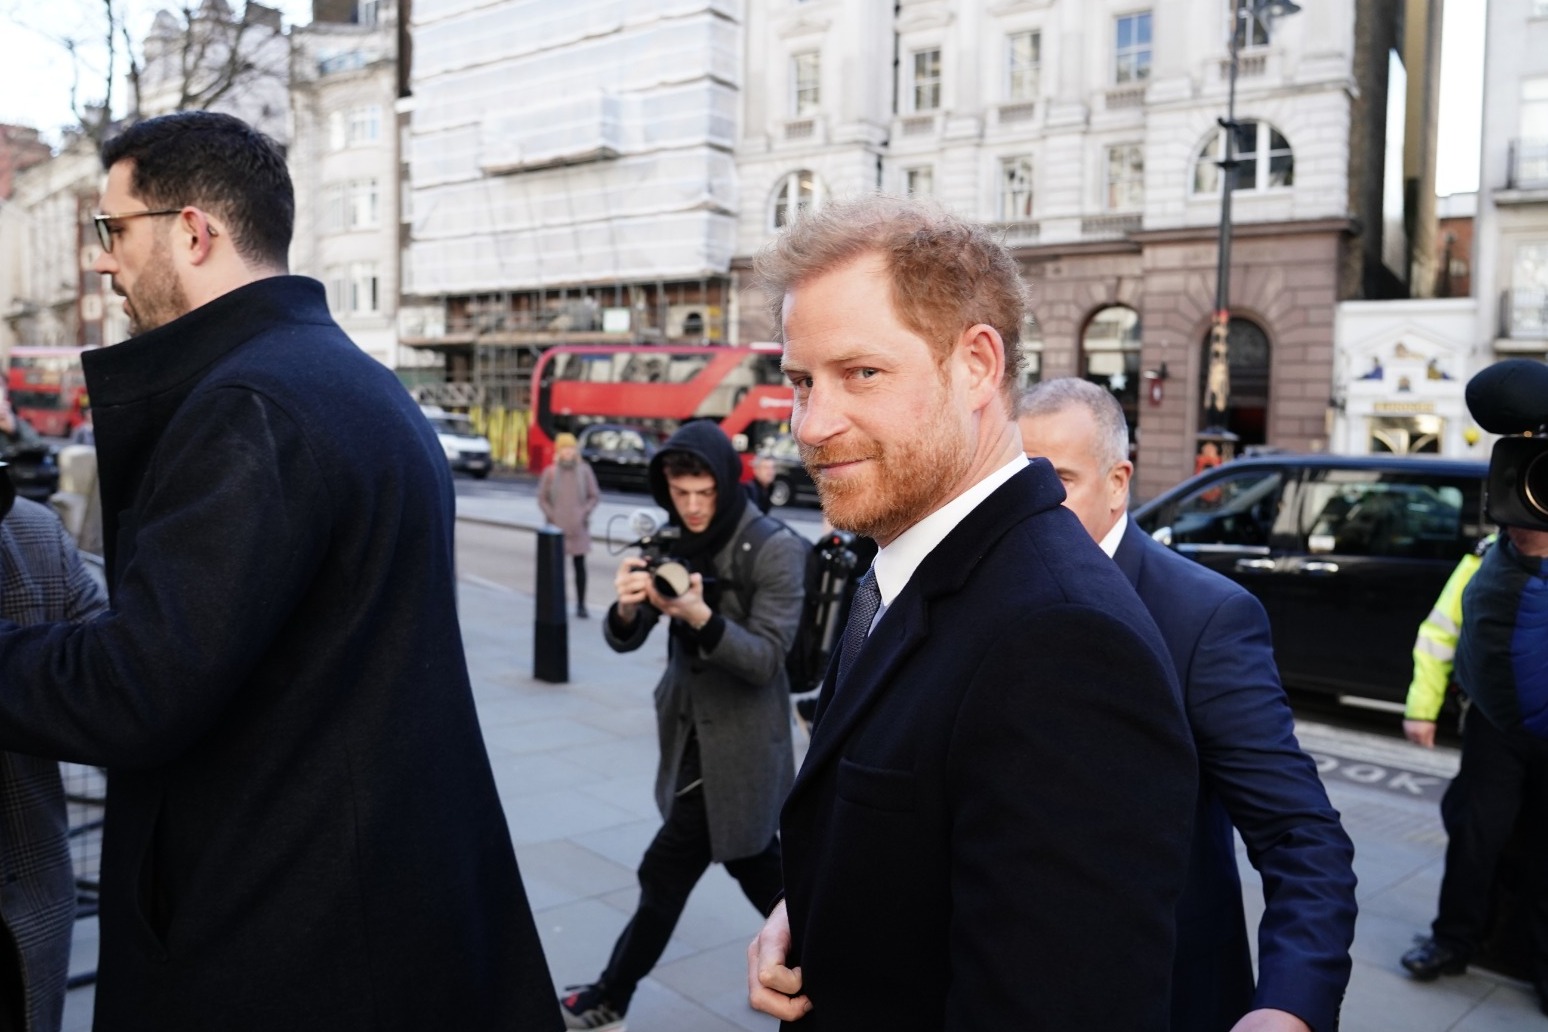 Duke of Sussex arrives in UK for High Court fight on ‘information misuse’ 